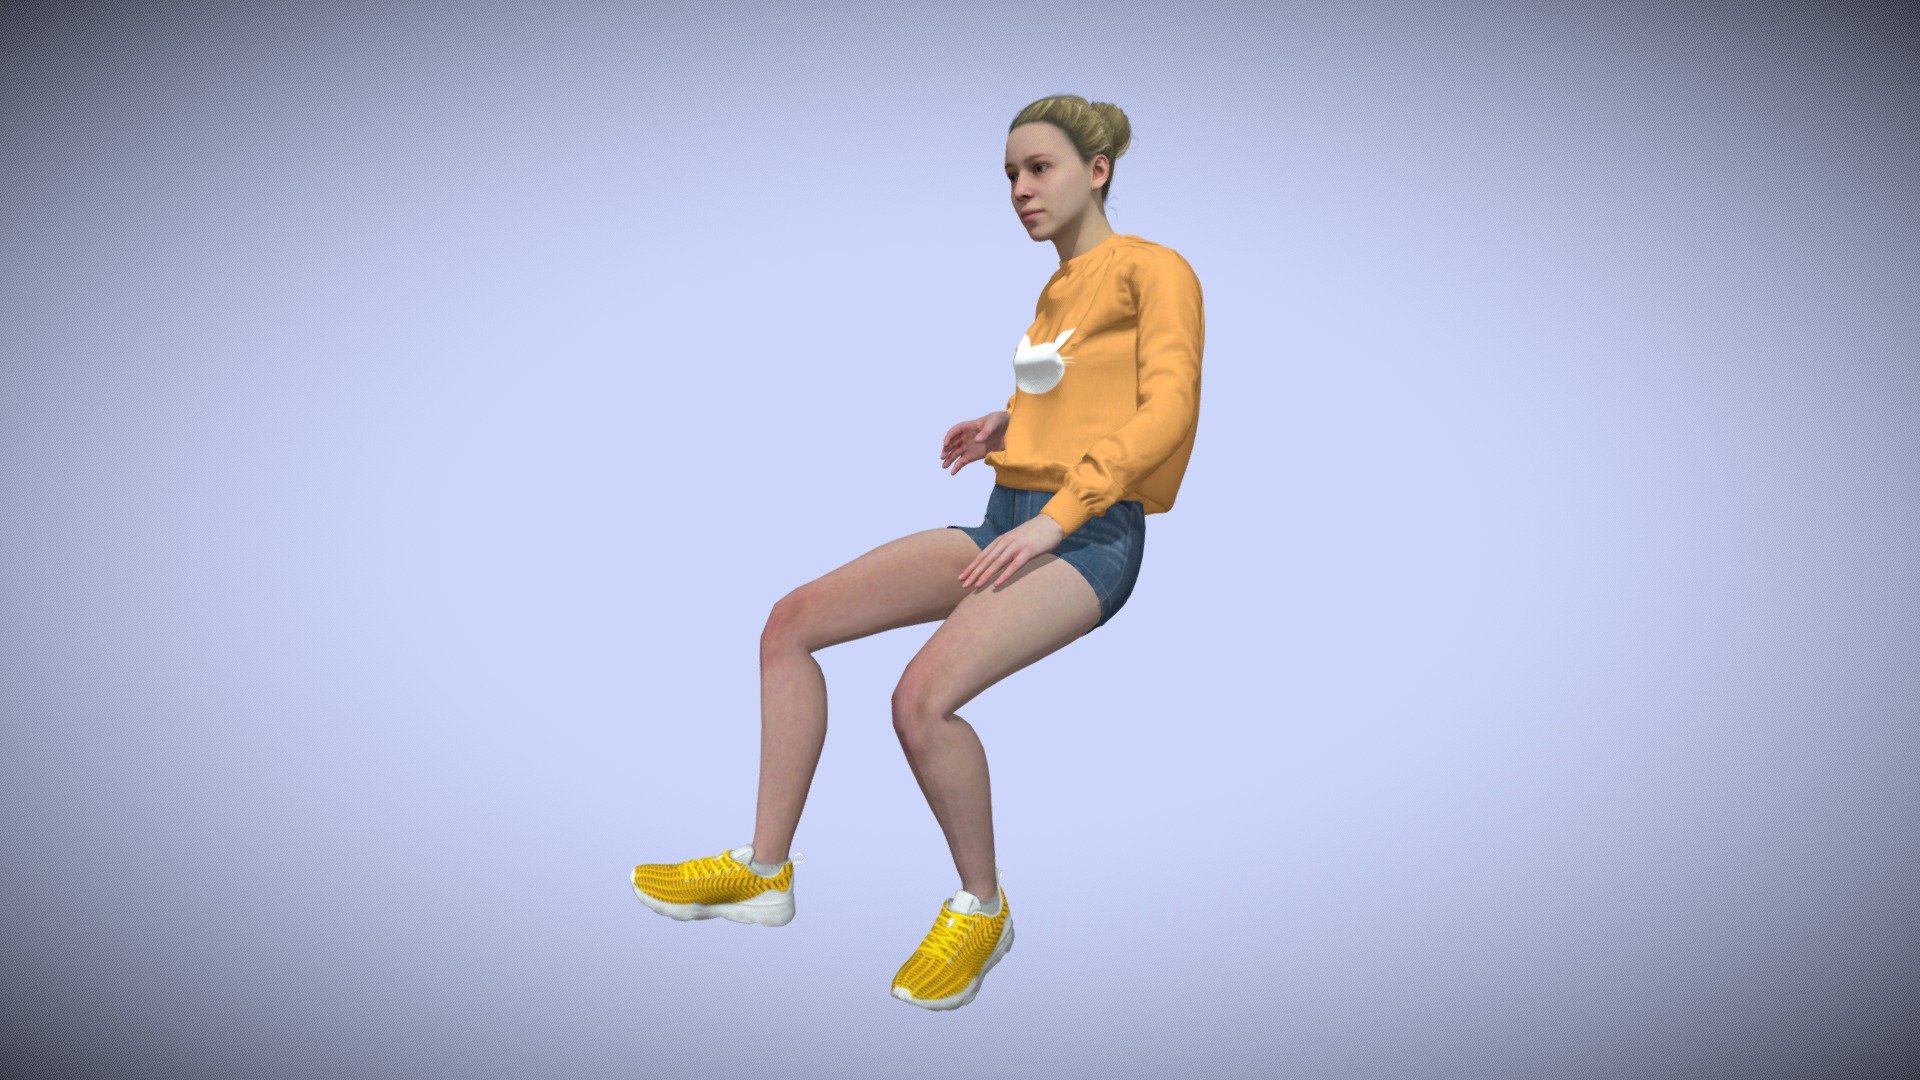 An animated female character sitting and speaking in this looped animation at 30 frames per second.

See this 3D model in action, and more models like it, here in this collection of free augmeneted reality apps:

https://morpheusar.com/ - Woman Character Sitting & Talking - 3D model by LasquetiSpice 3d model